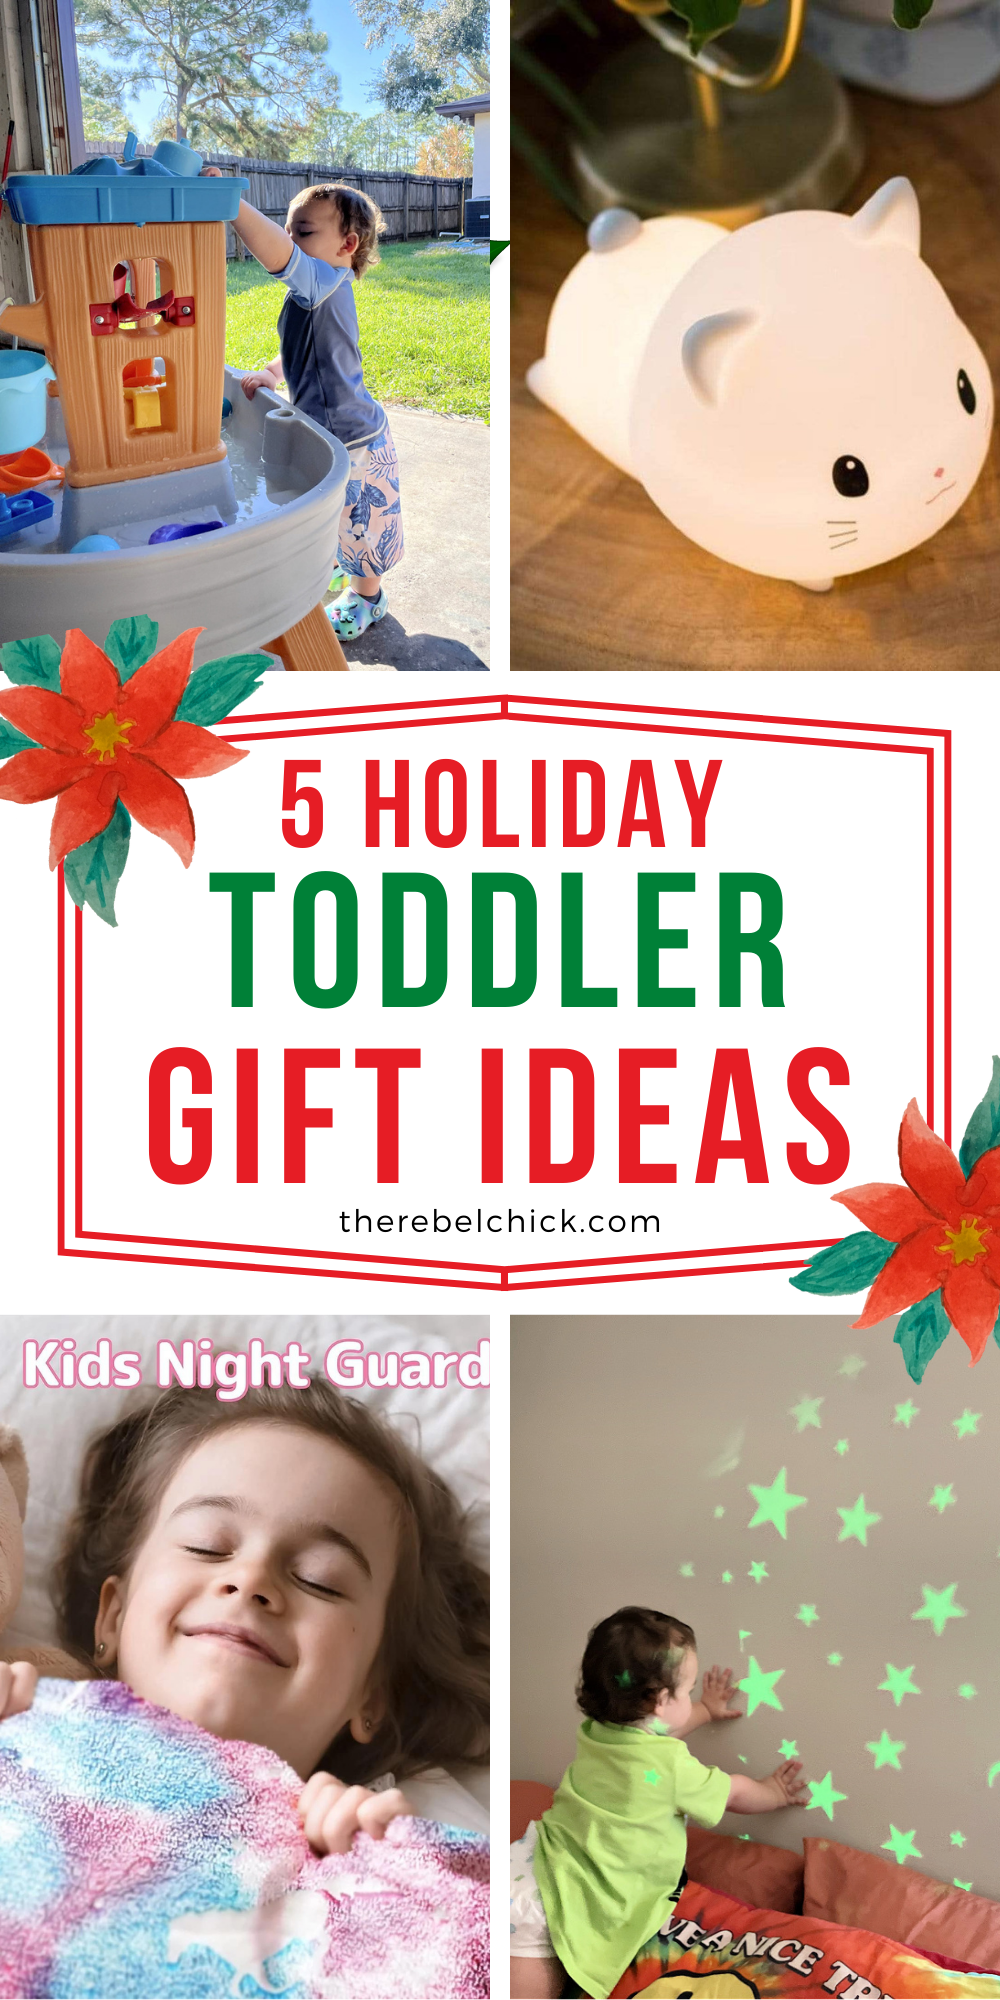 5 Holiday Gift Ideas for Toddlers